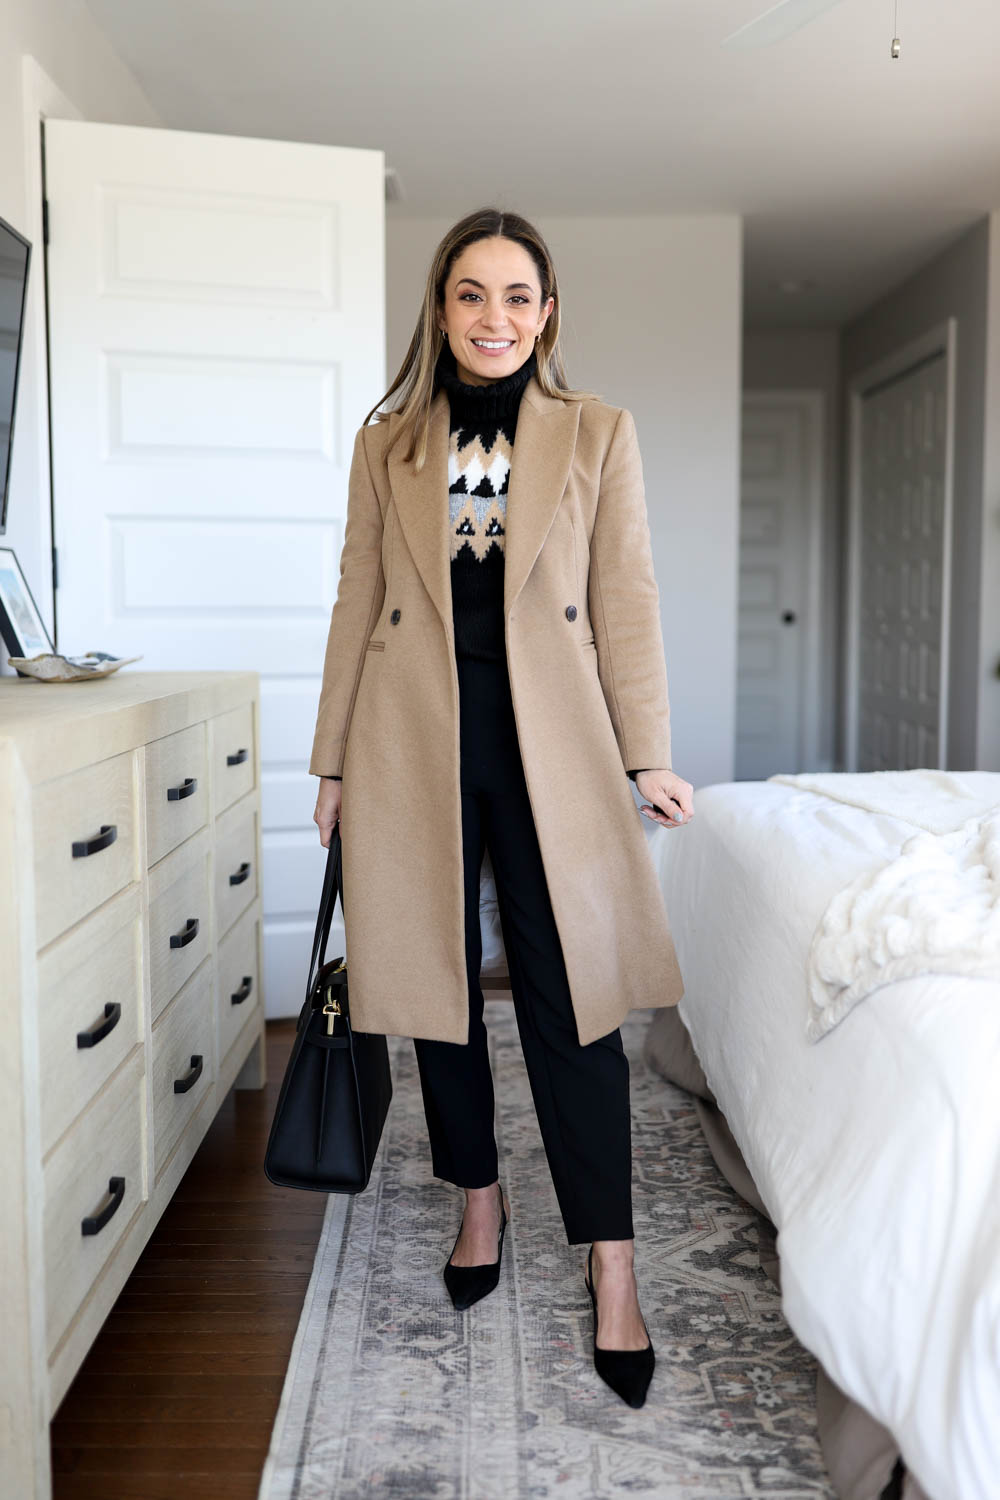 Neutral Outfits for Work - Pumps & Push Ups